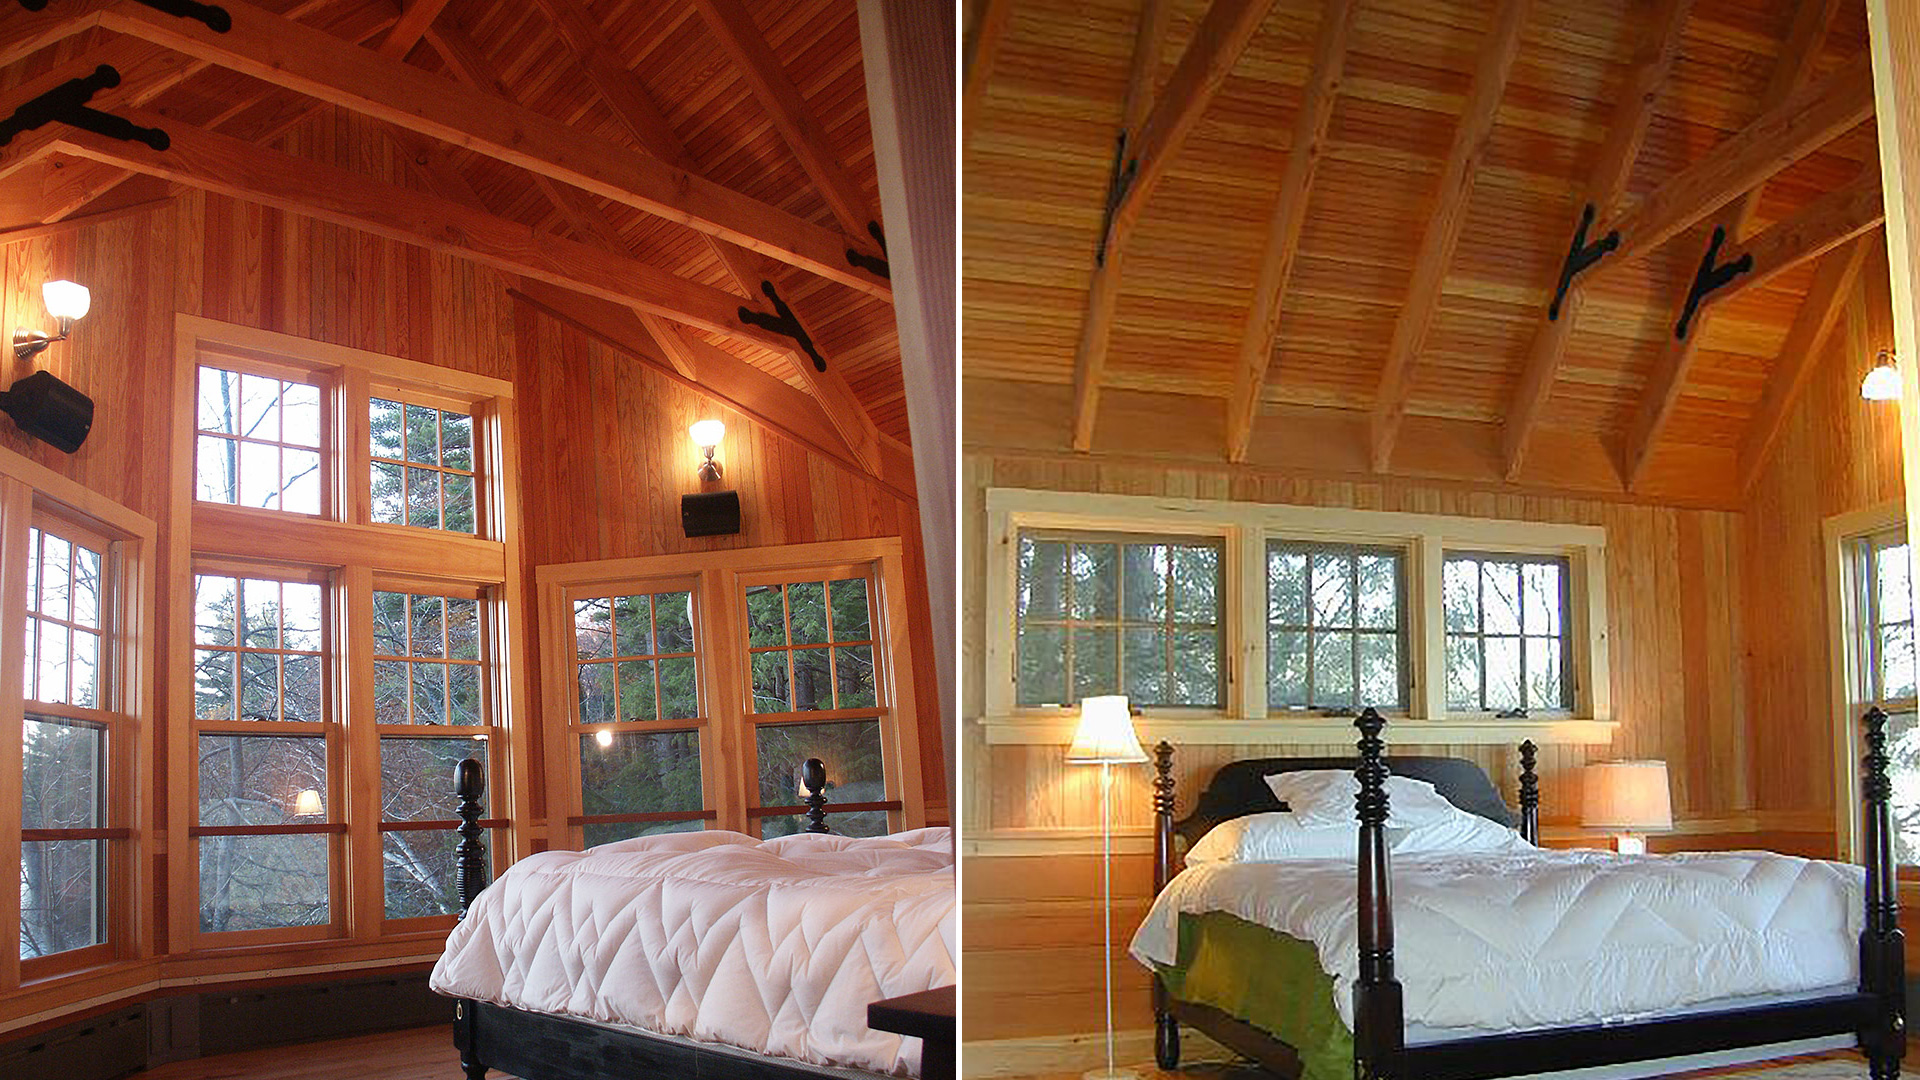 Silver Lake, New Hampshire bedrooms with vaulted ceiling with exposed wood rafters and collar ties